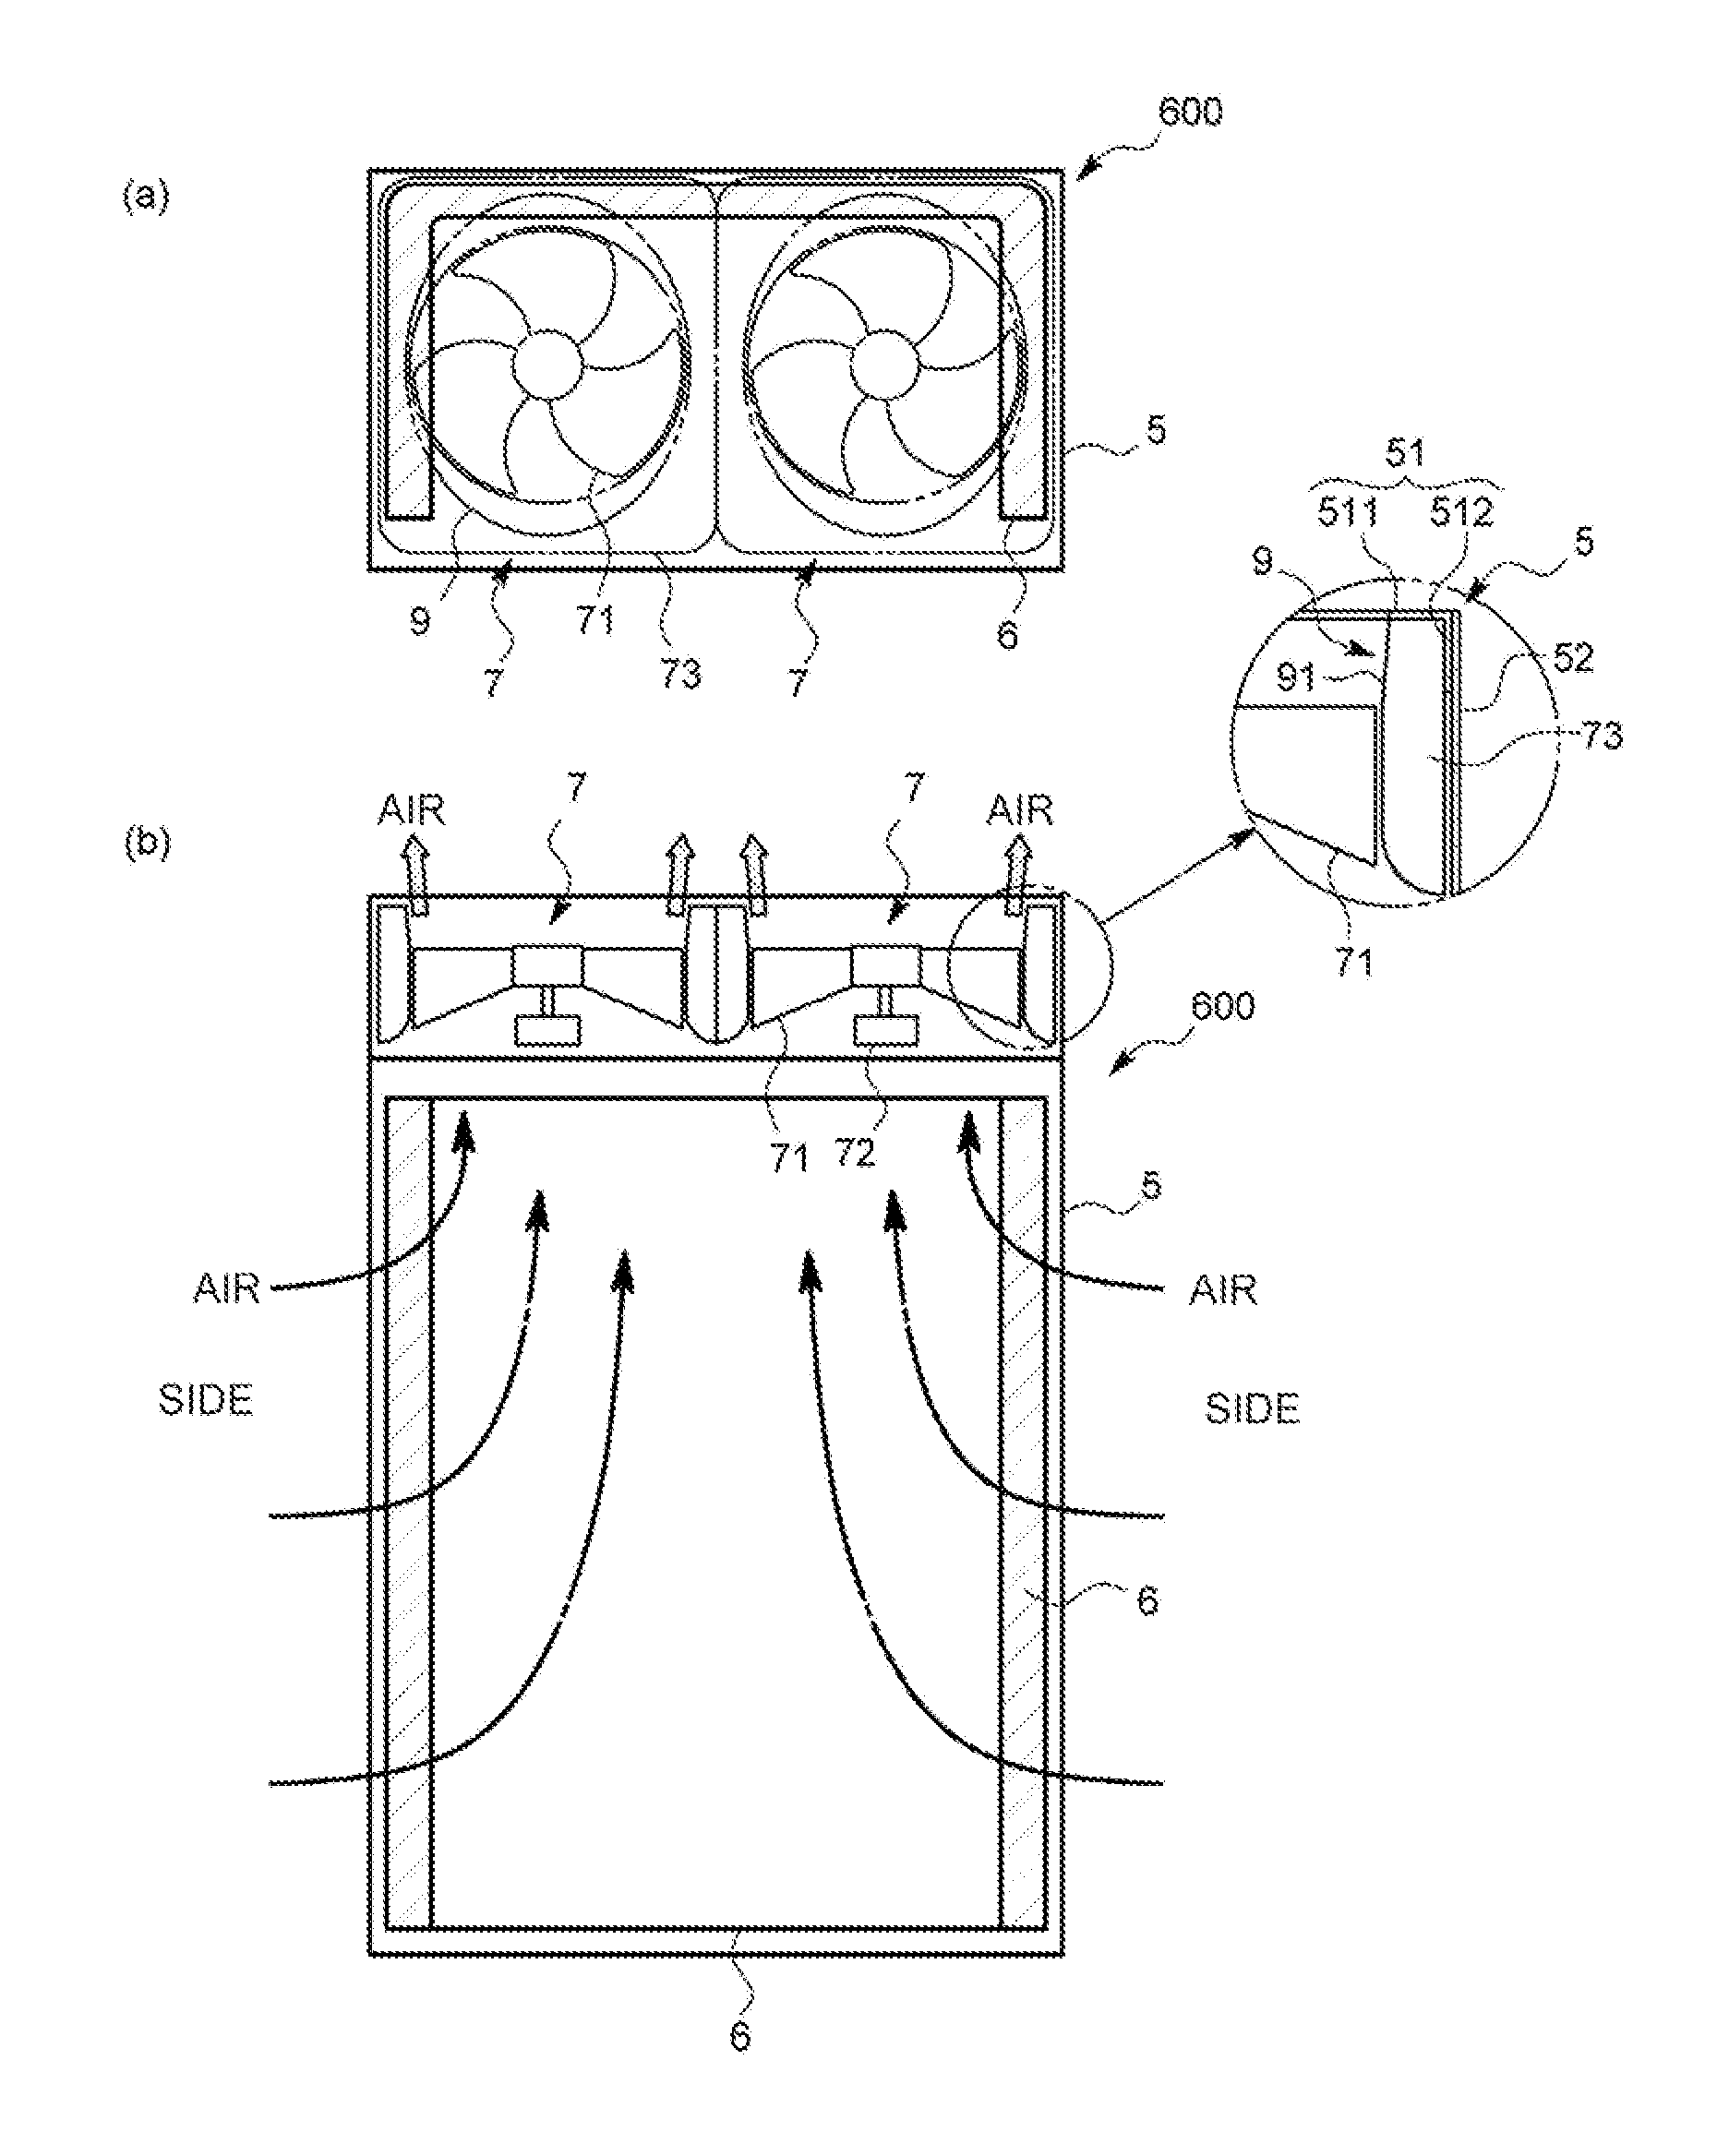 Blower and outdoor unit of air conditioner comprising same